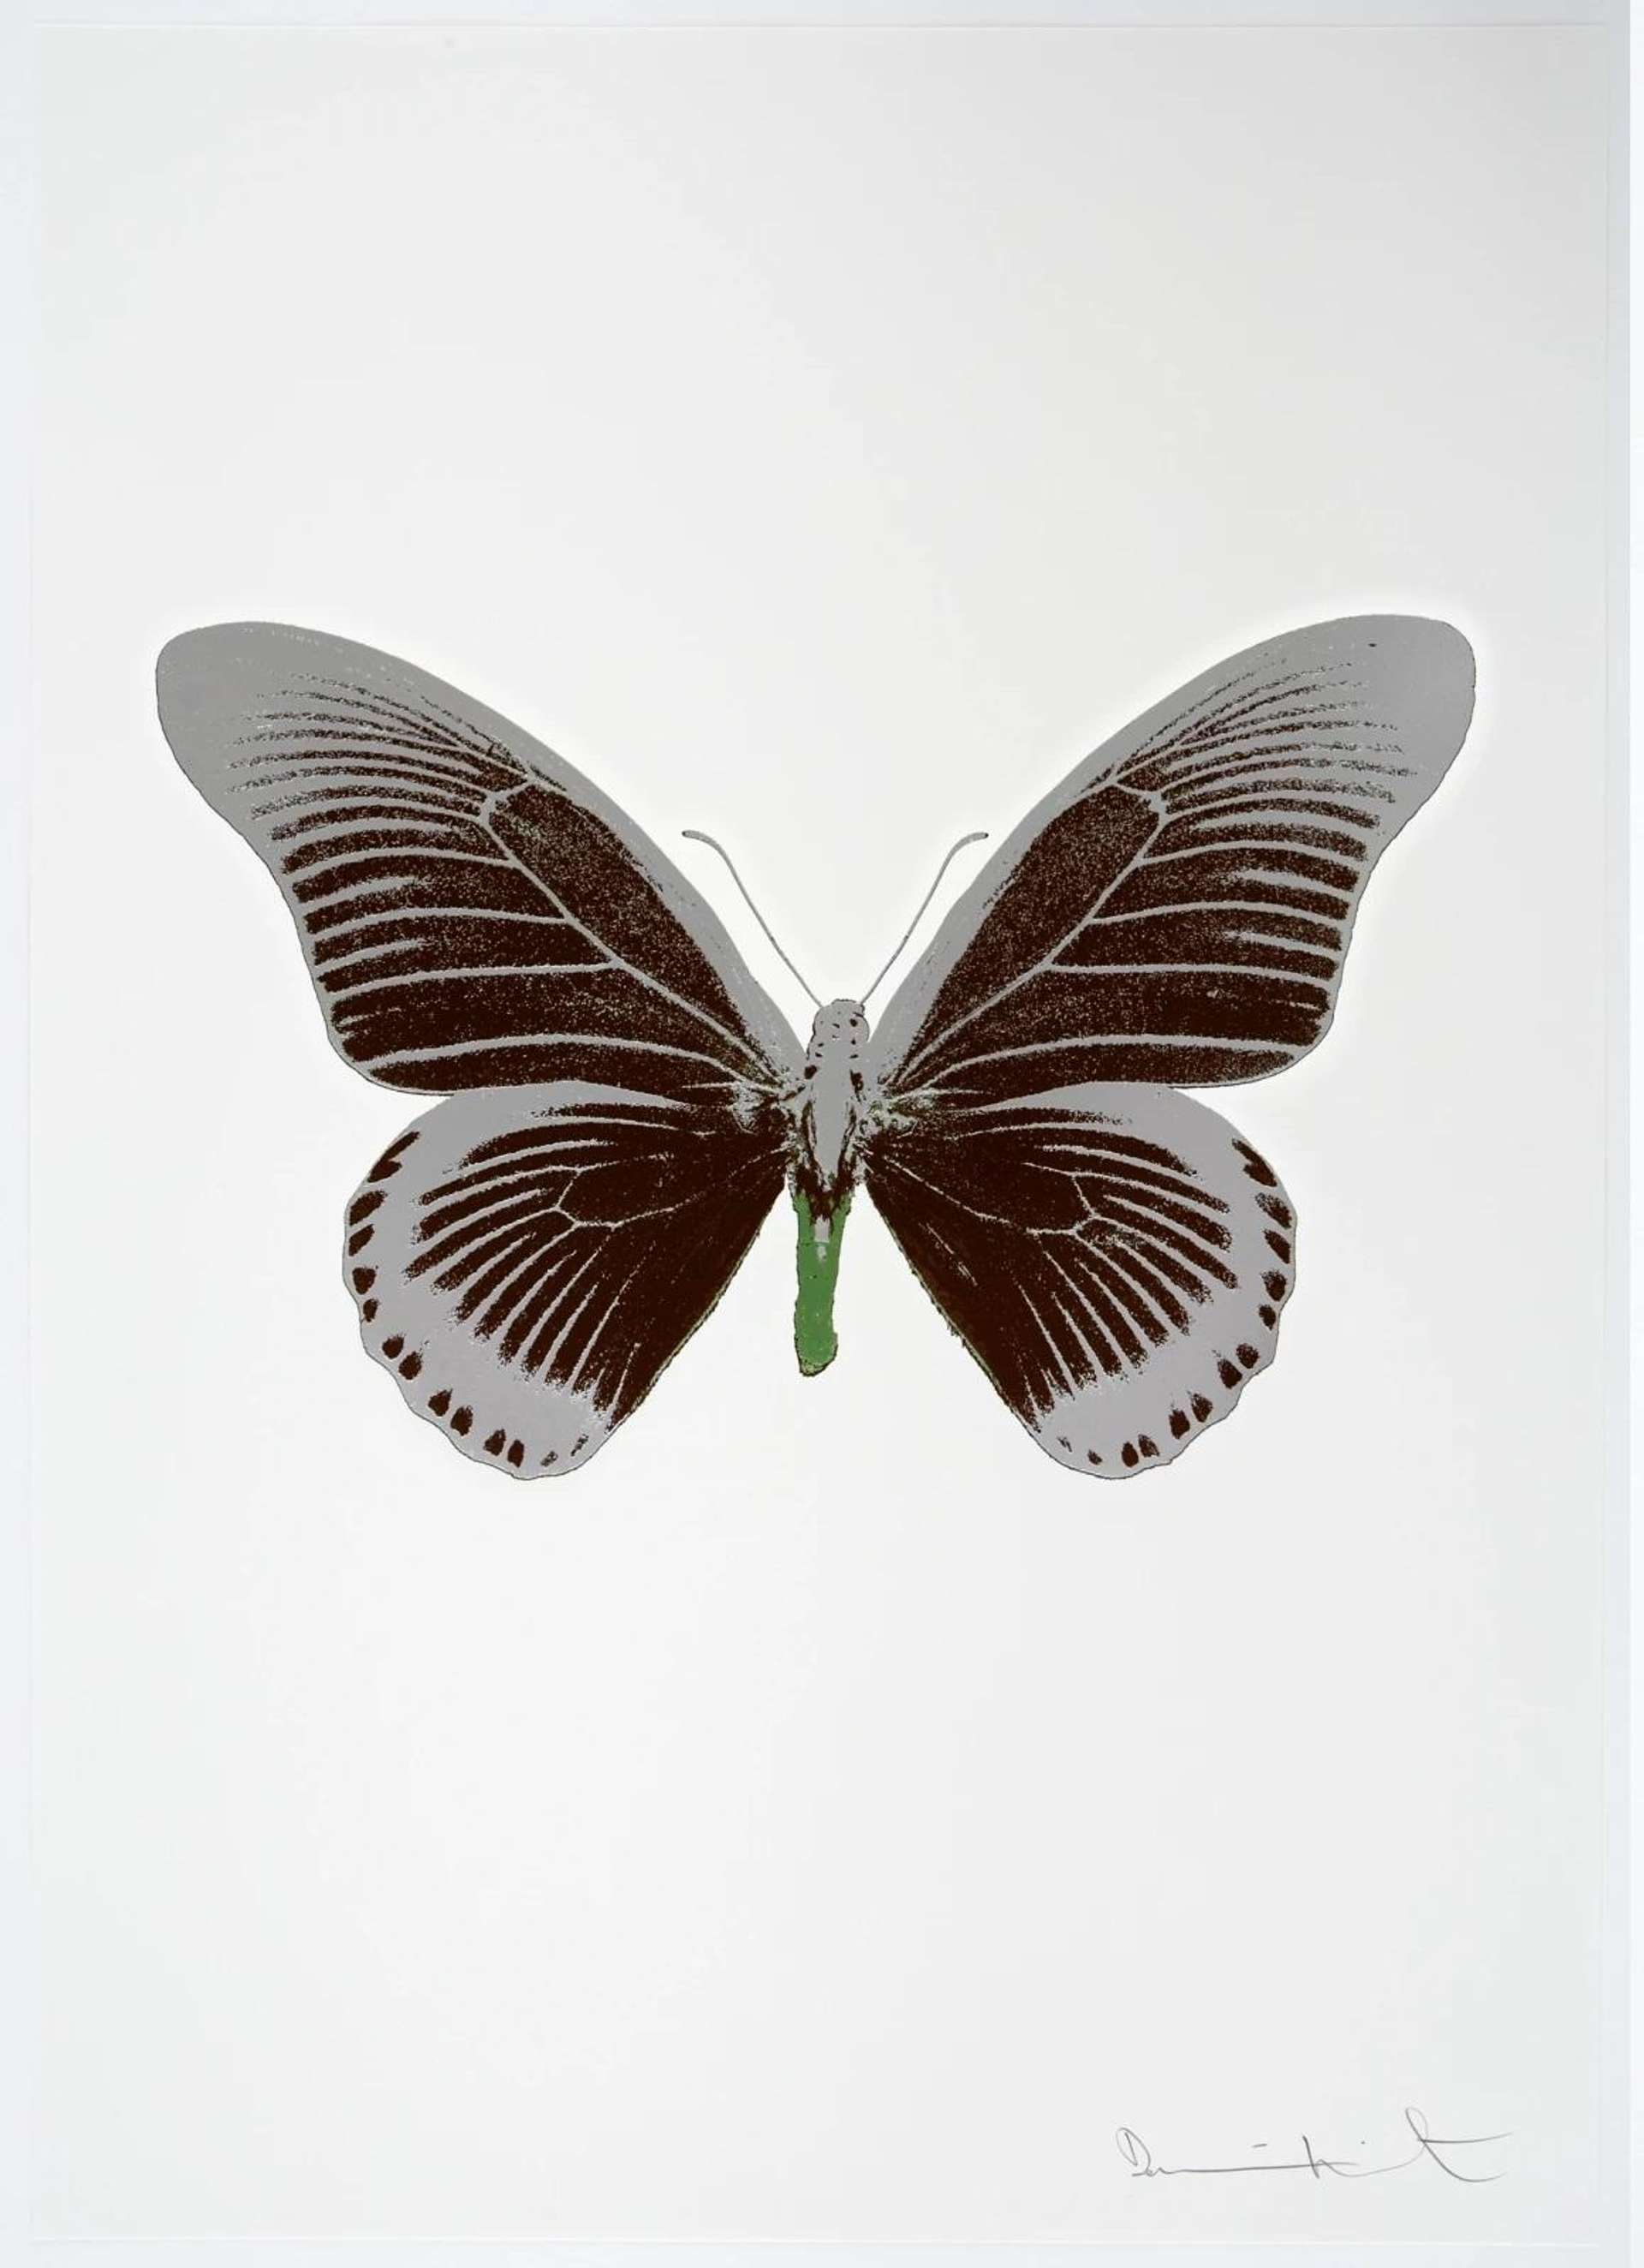 Damien Hirst: The Souls IV (chocolate, silver gloss, leaf green) - Signed Print